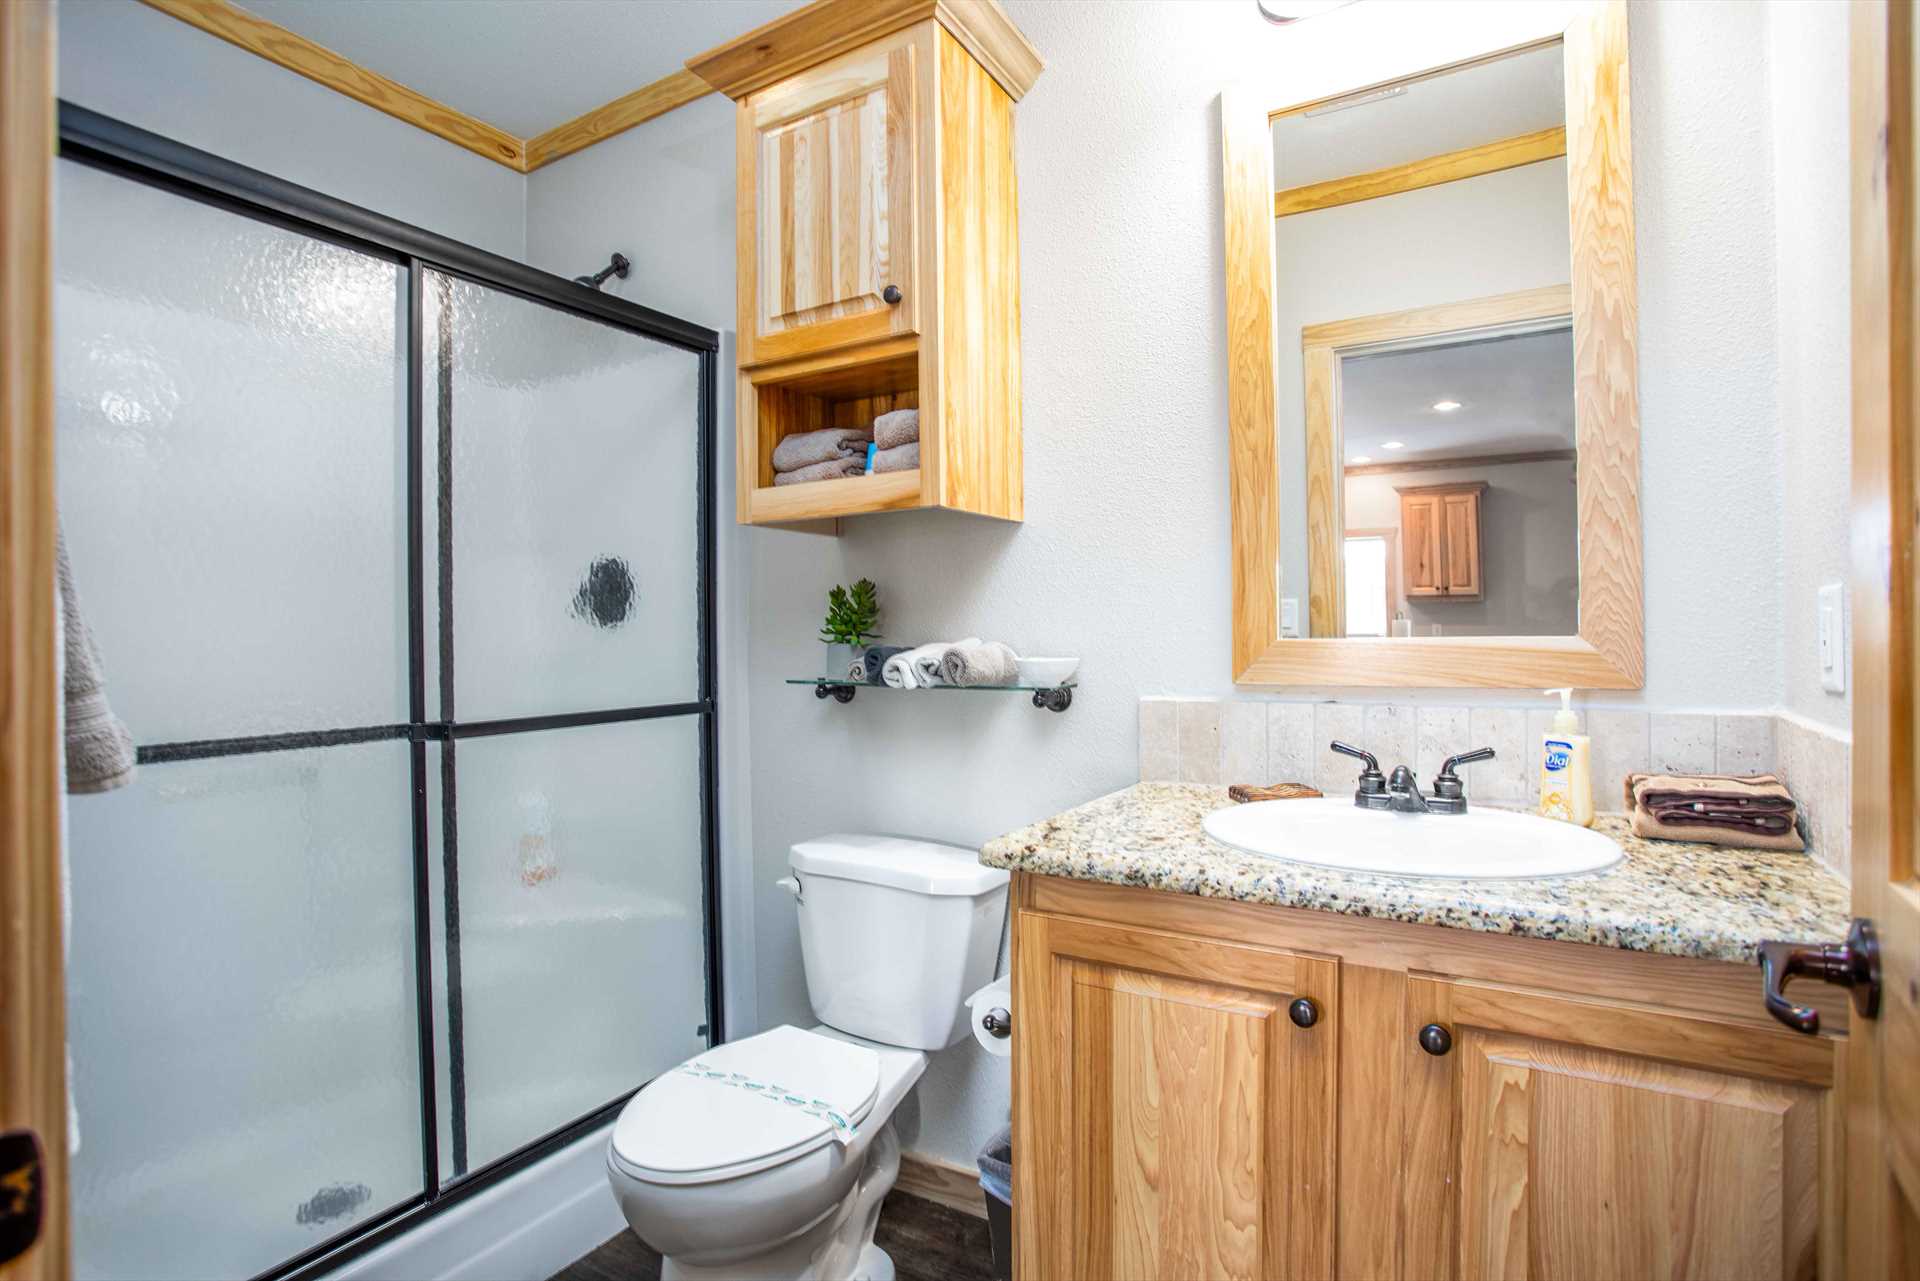                                                 The spotless second bathroom is equipped with a shower, and both baths include clean linens during your stay.